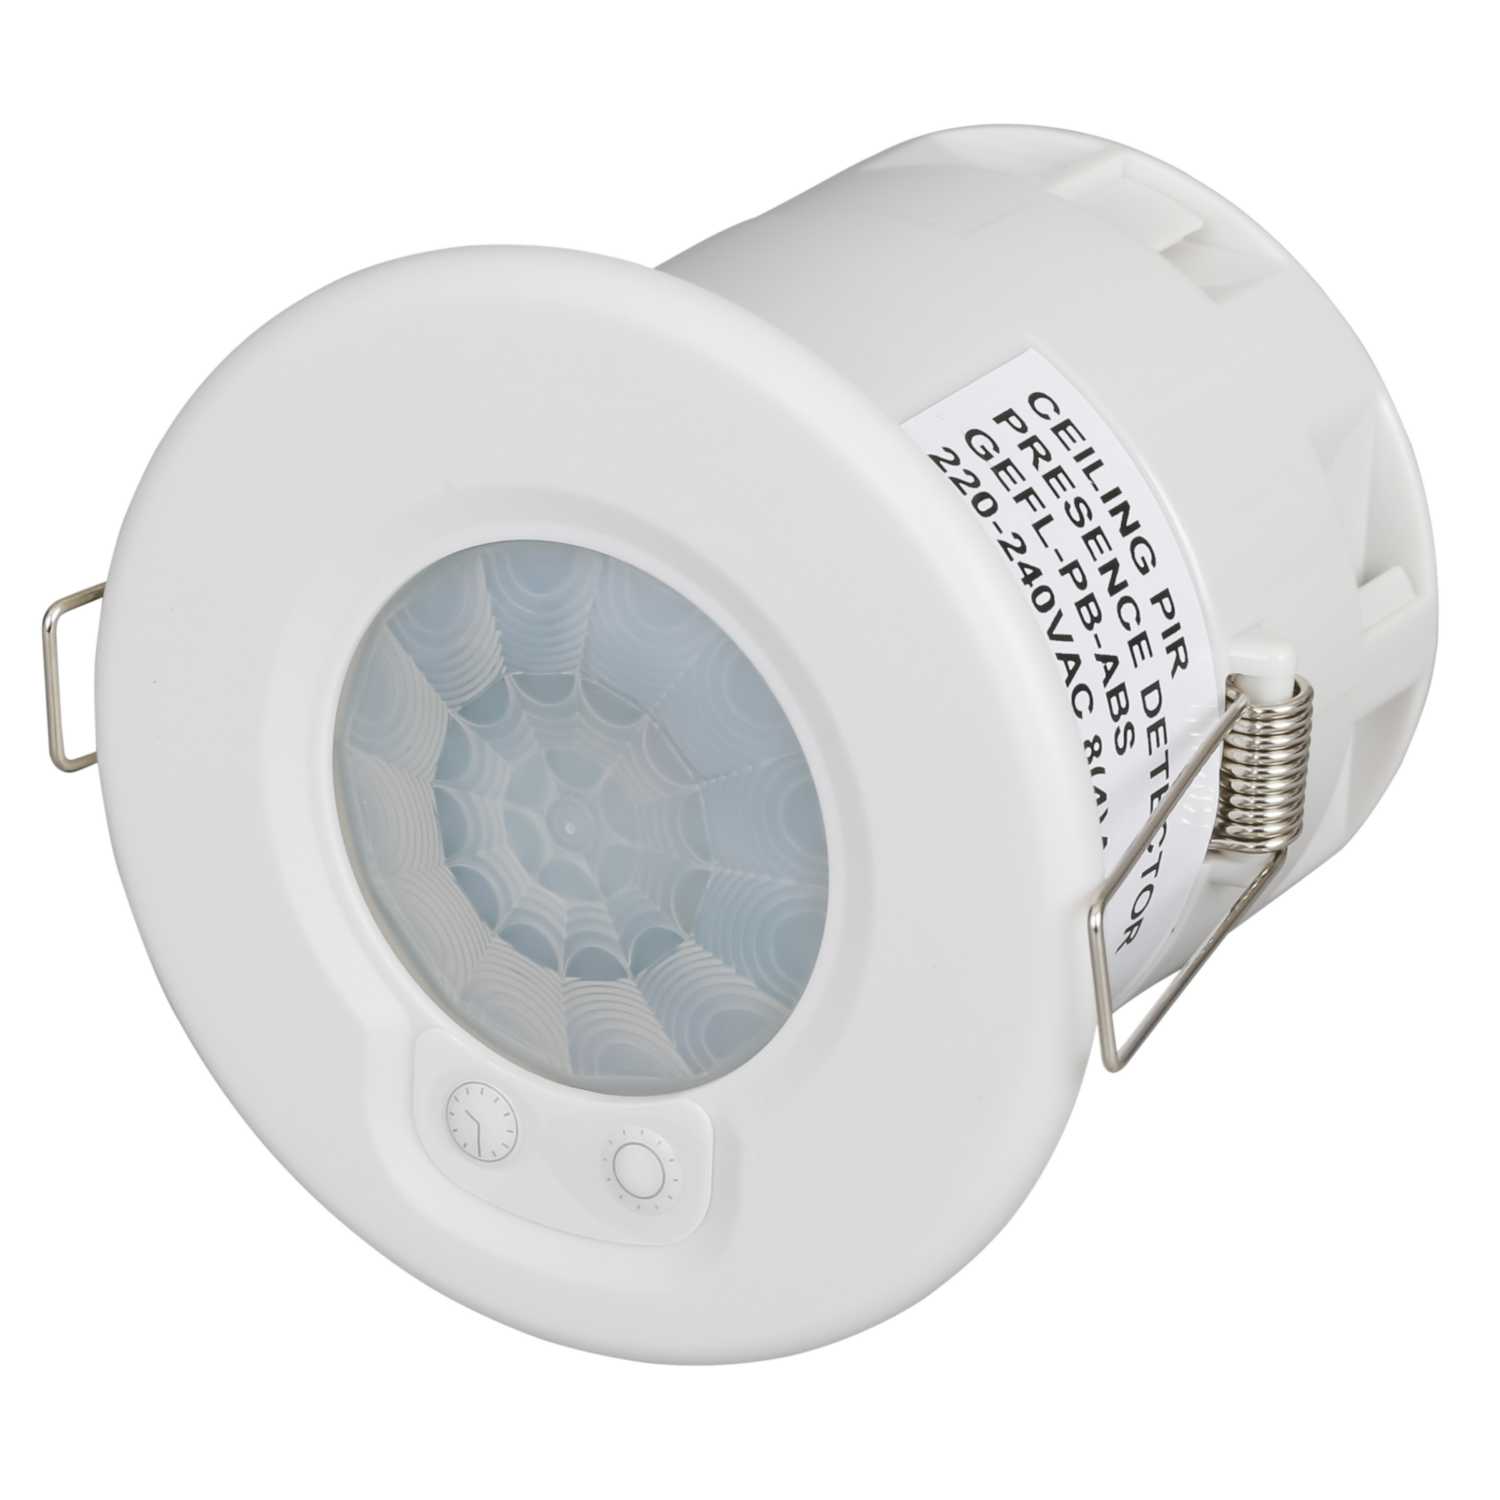 CP Electronics GEFL PIR Presence Detector IP40 Switching with Lux Level Sensing